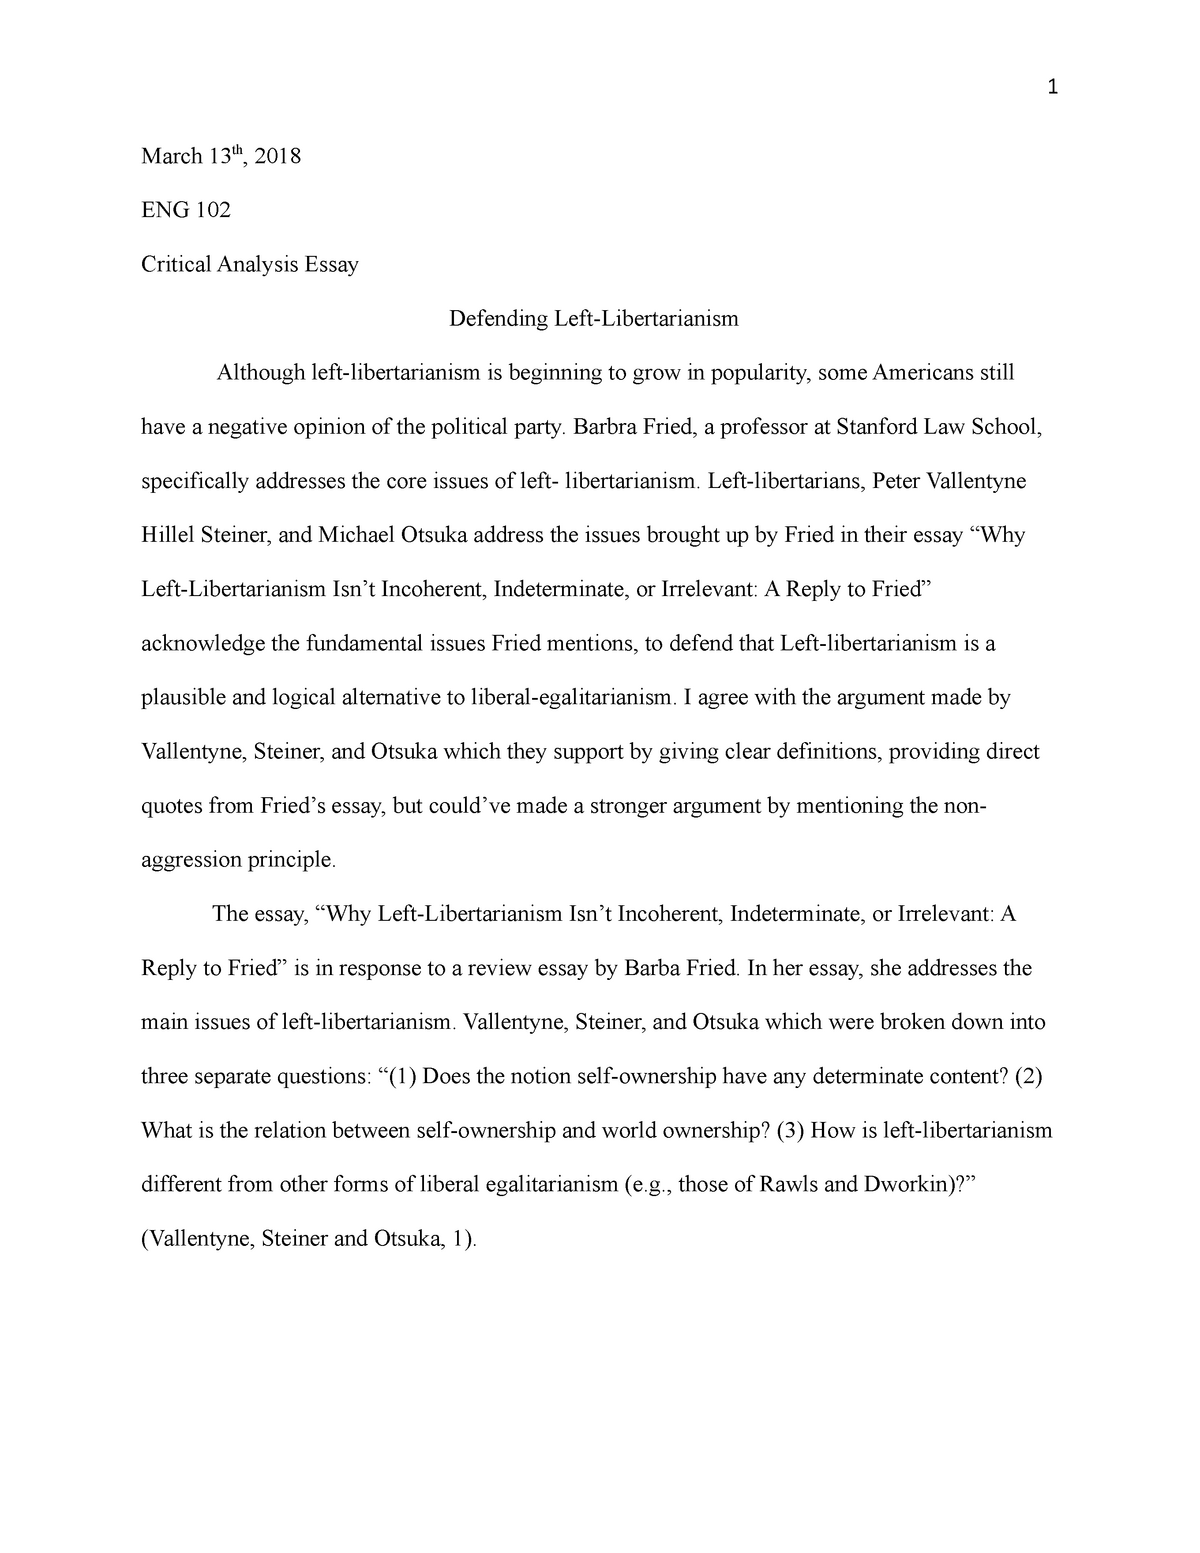 help with professional critical analysis essay on founding fathers